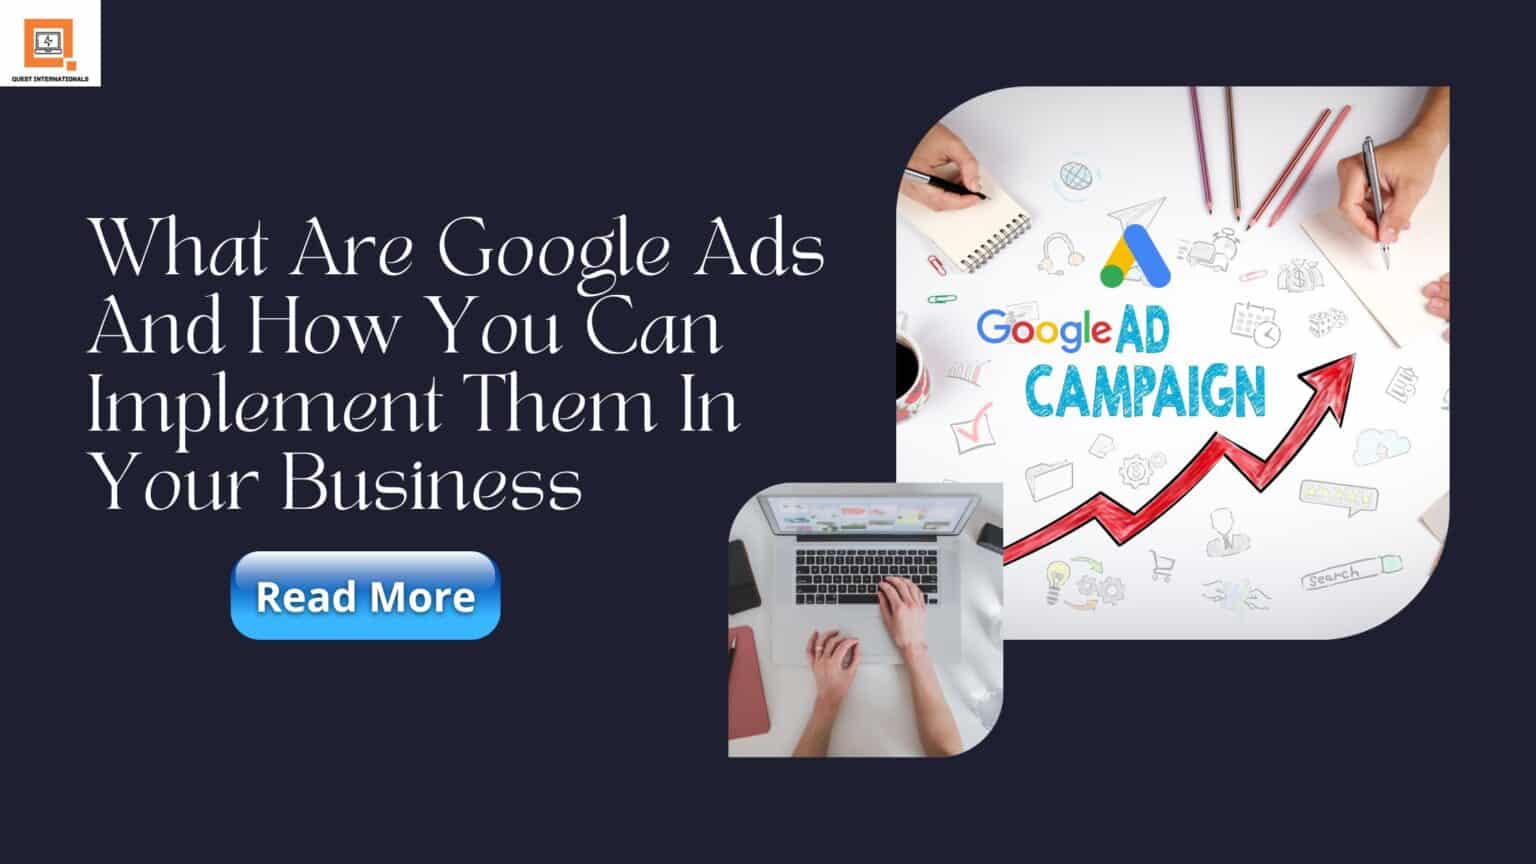 You are currently viewing What Are Google Ads And How You Can Implement Them In Your Business